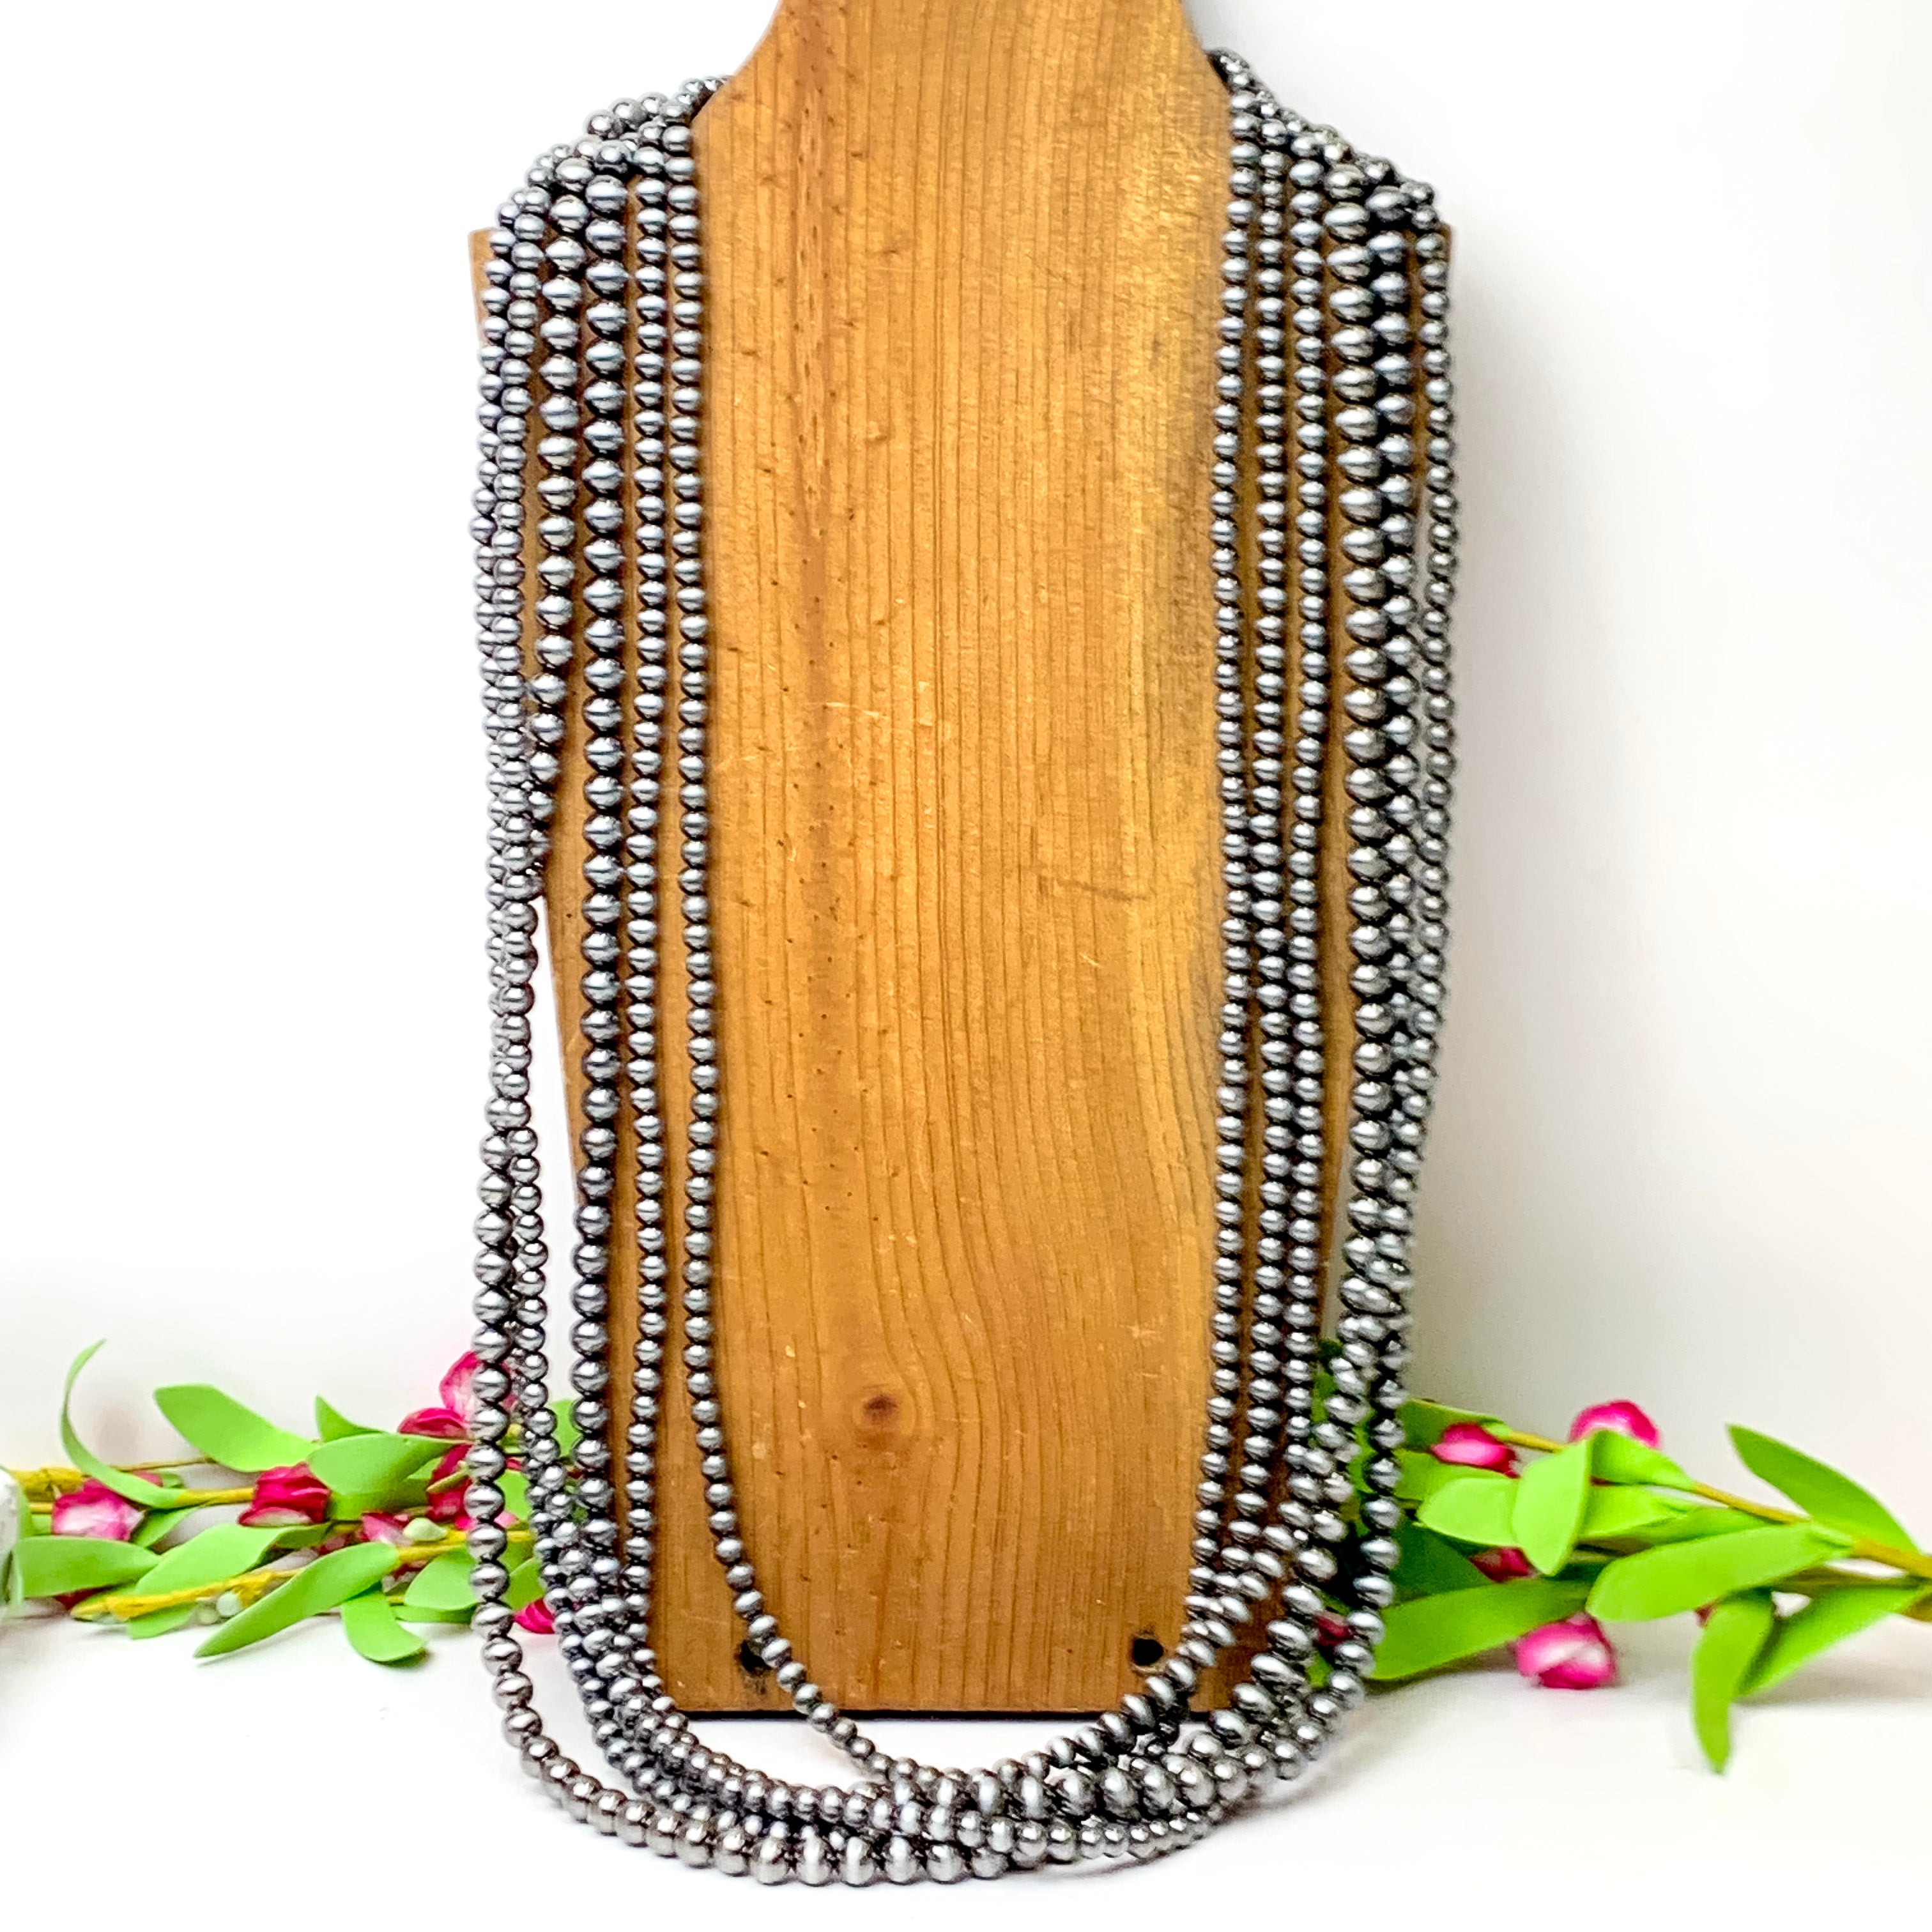 Six Strand Long Faux Navajo Pearl Necklace in Silver Tone - Giddy Up Glamour Boutique